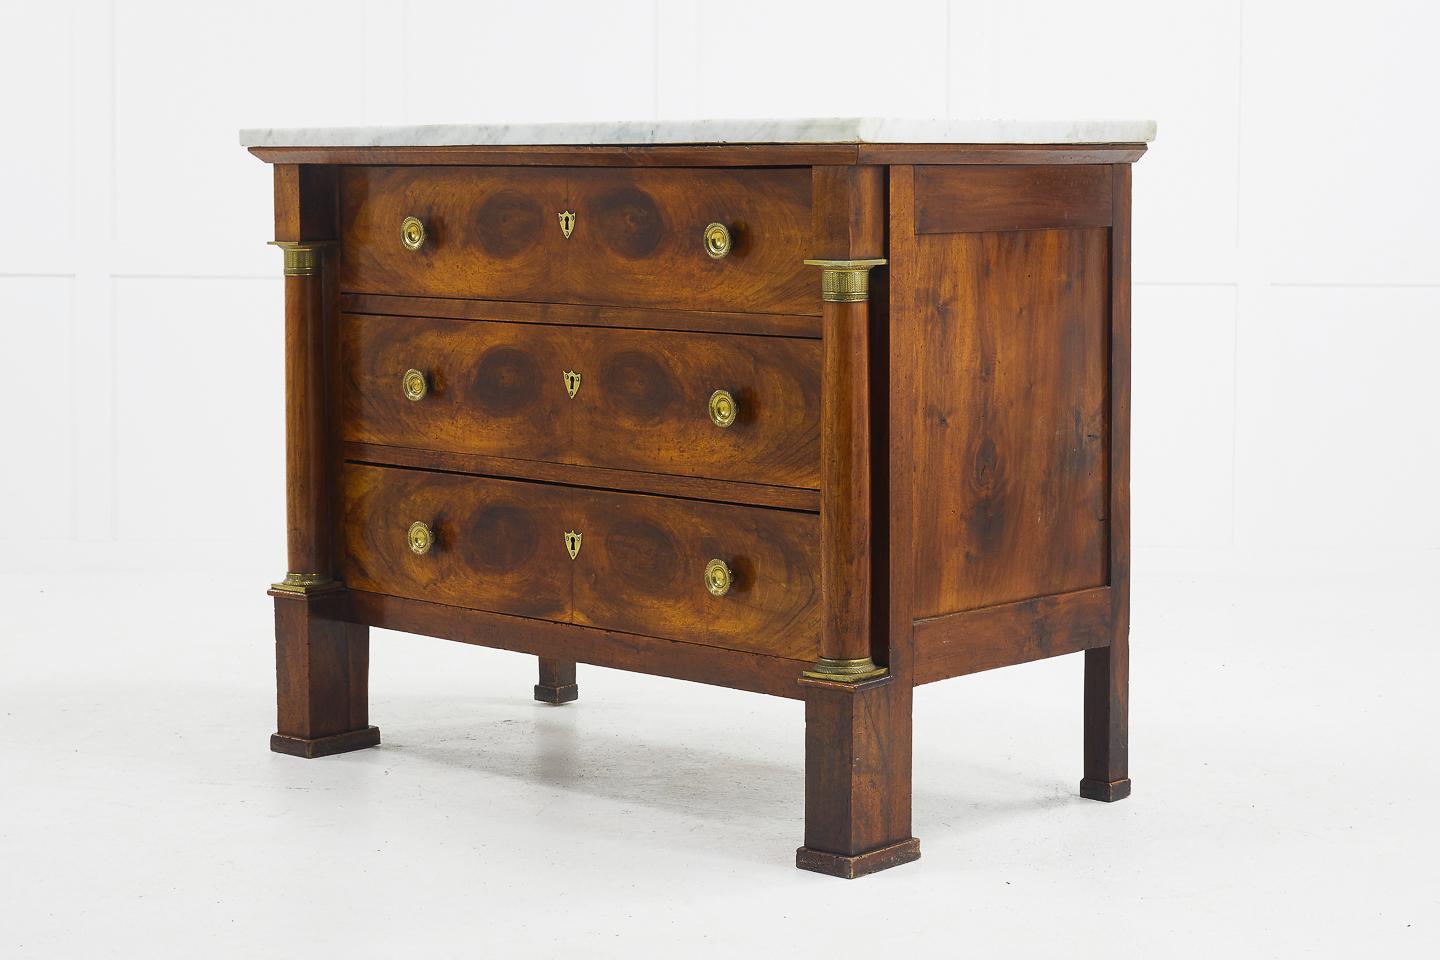 19th century French walnut commode with ormolu mounts. Having a good use of symmetrical, matching veneer patterns on the drawers making this a wonderful example of this style of commode.